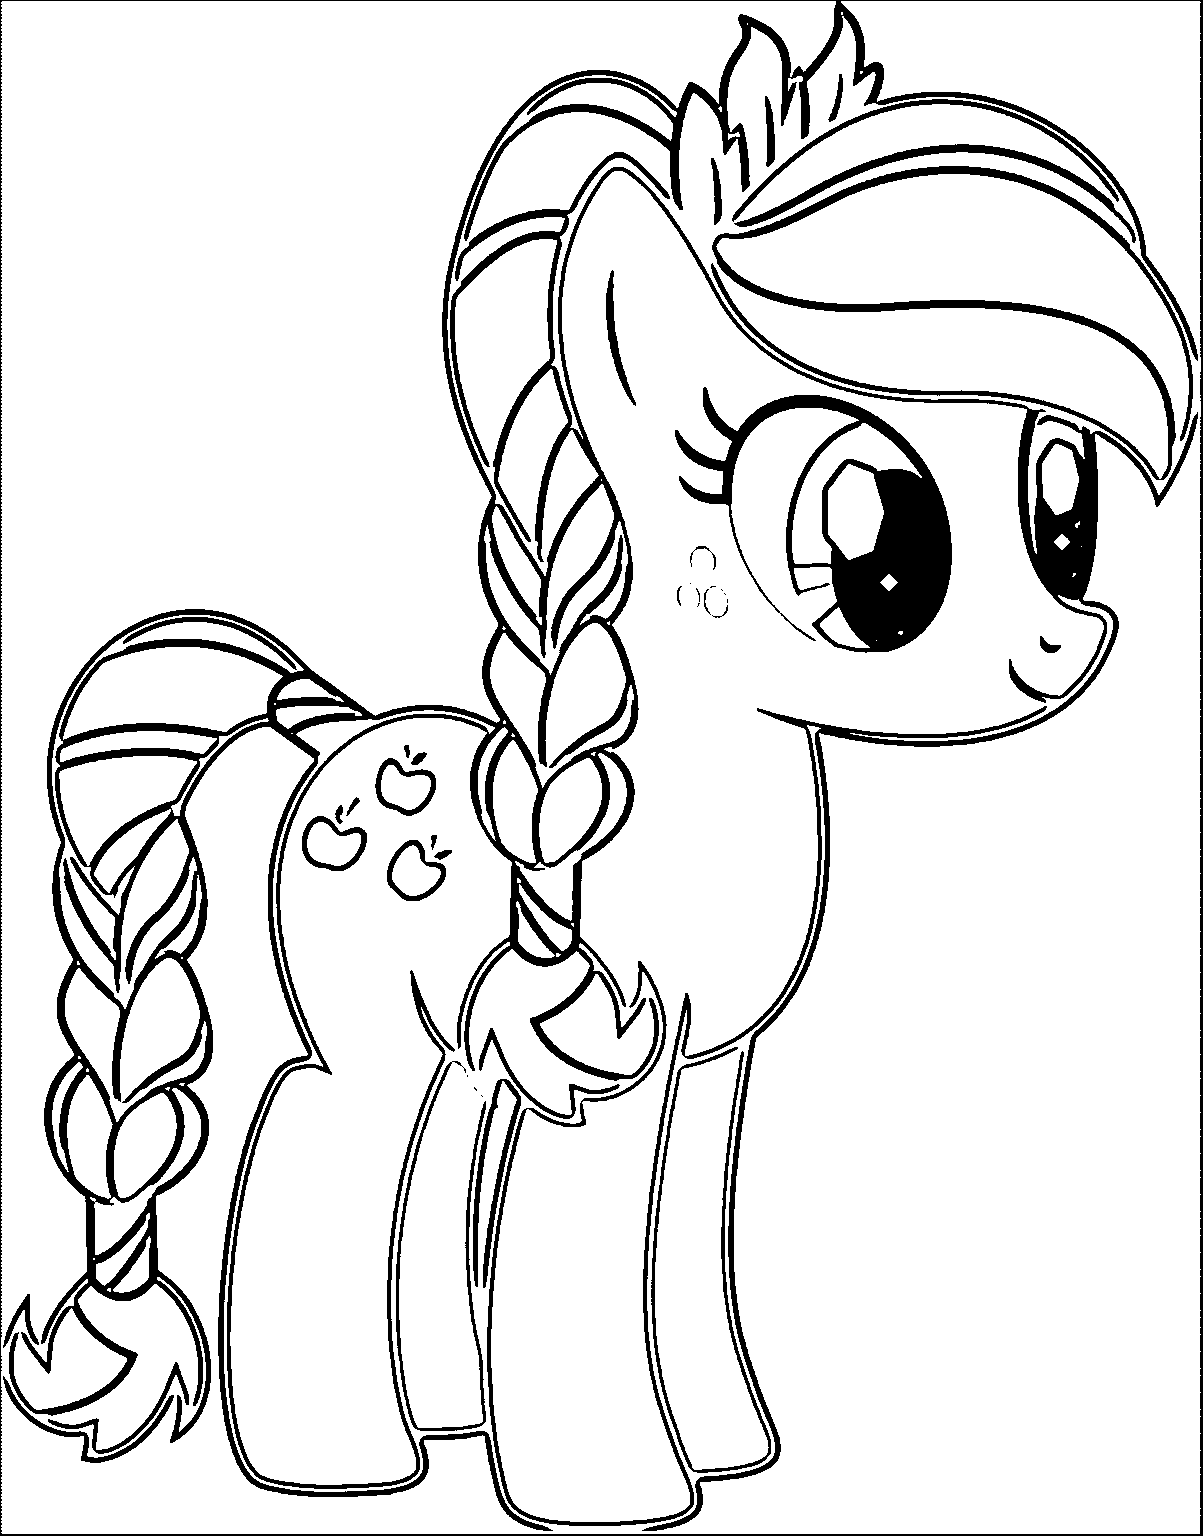 Pony Coloring Pages That People Have Drawn - Coloring Home